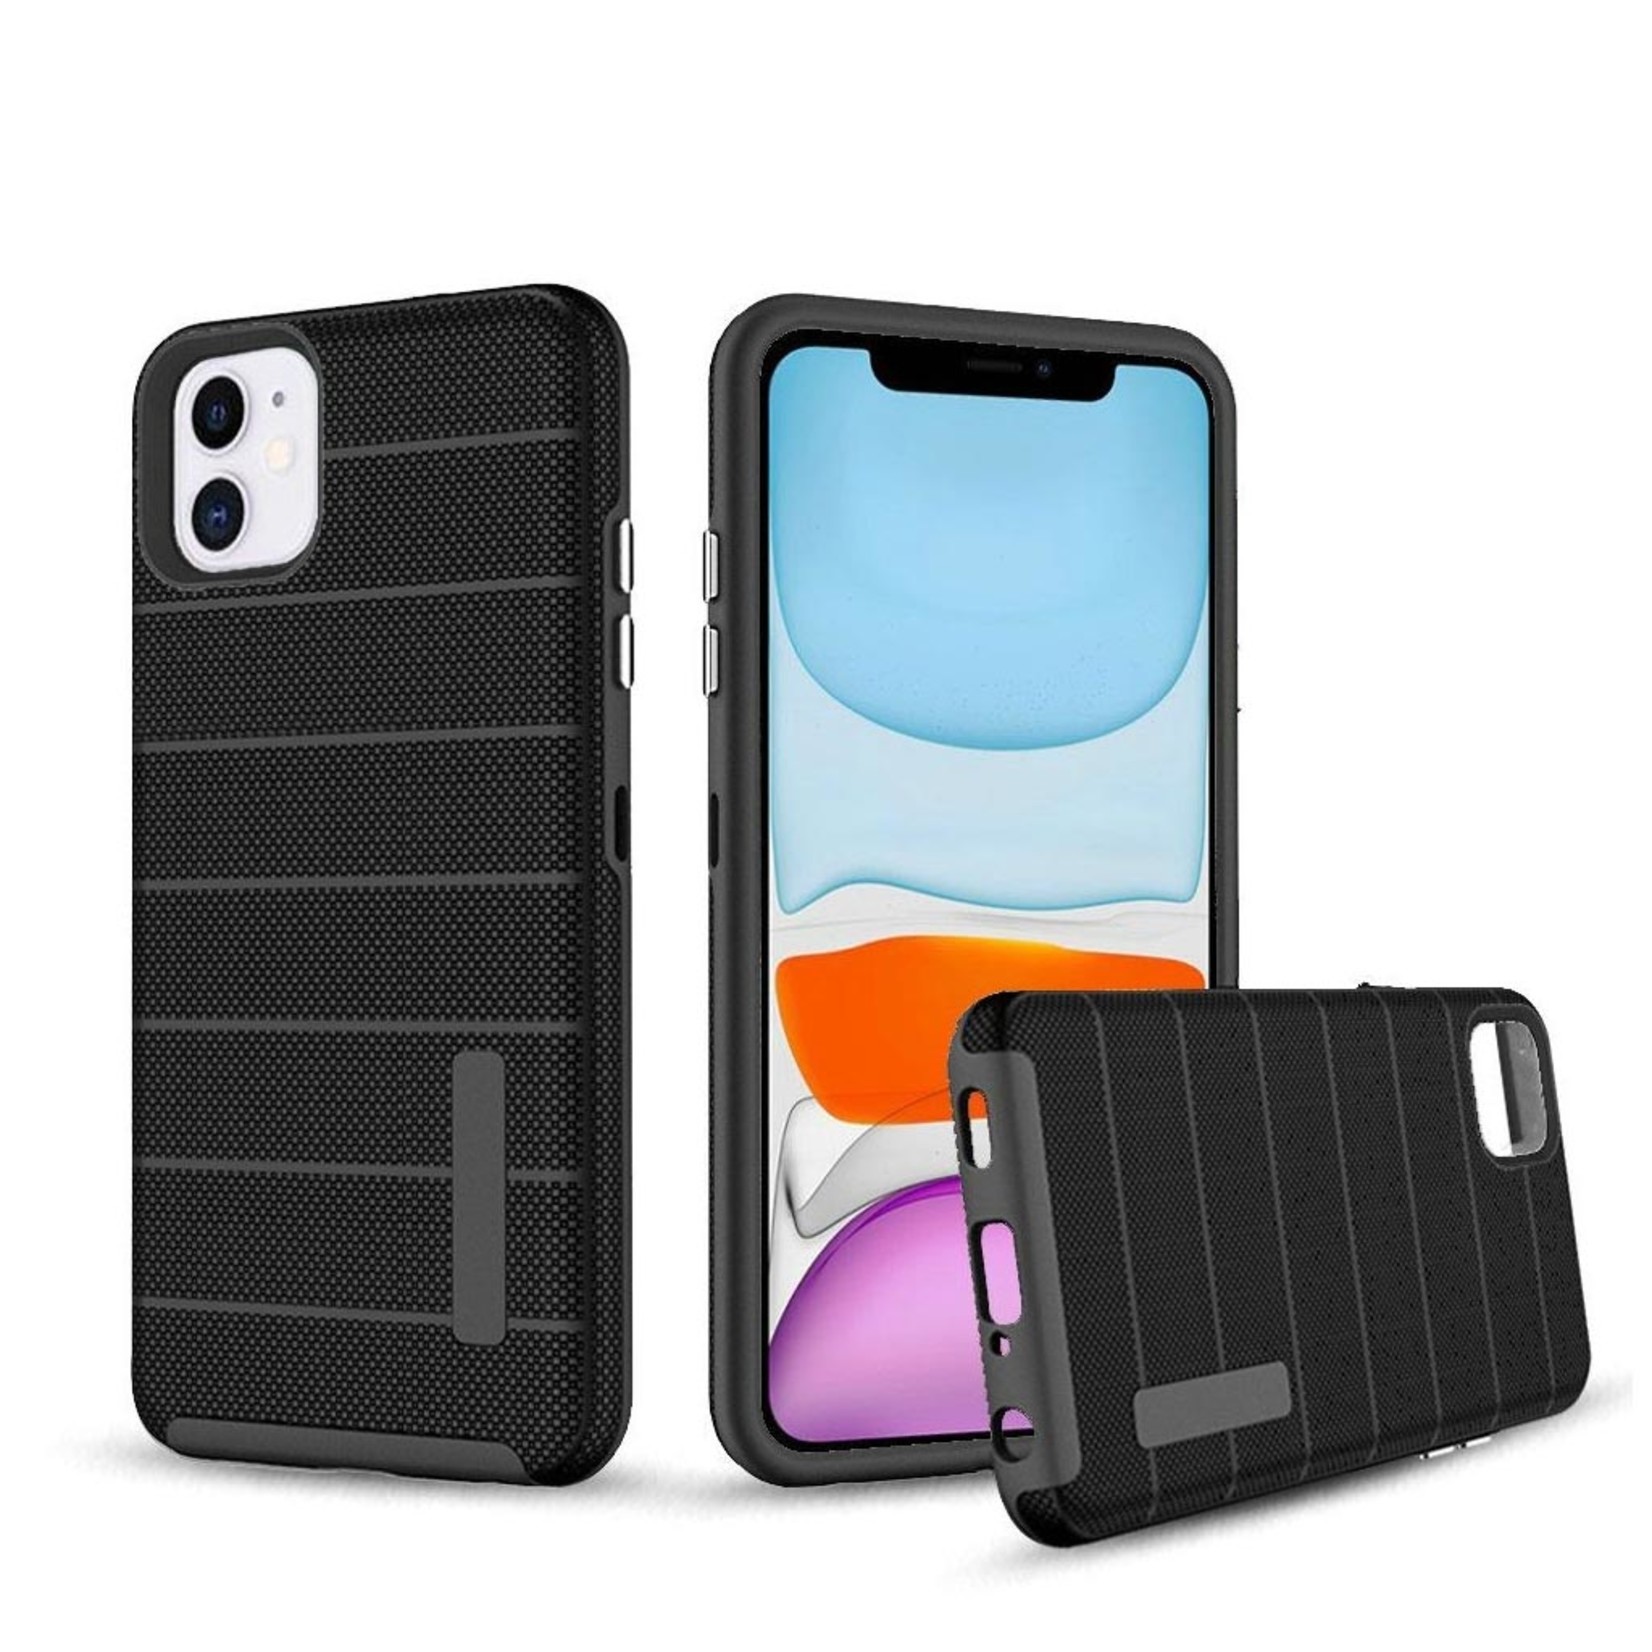 PC TPU Shock Proof Hybrid case with Stripes Design for iPhone 11